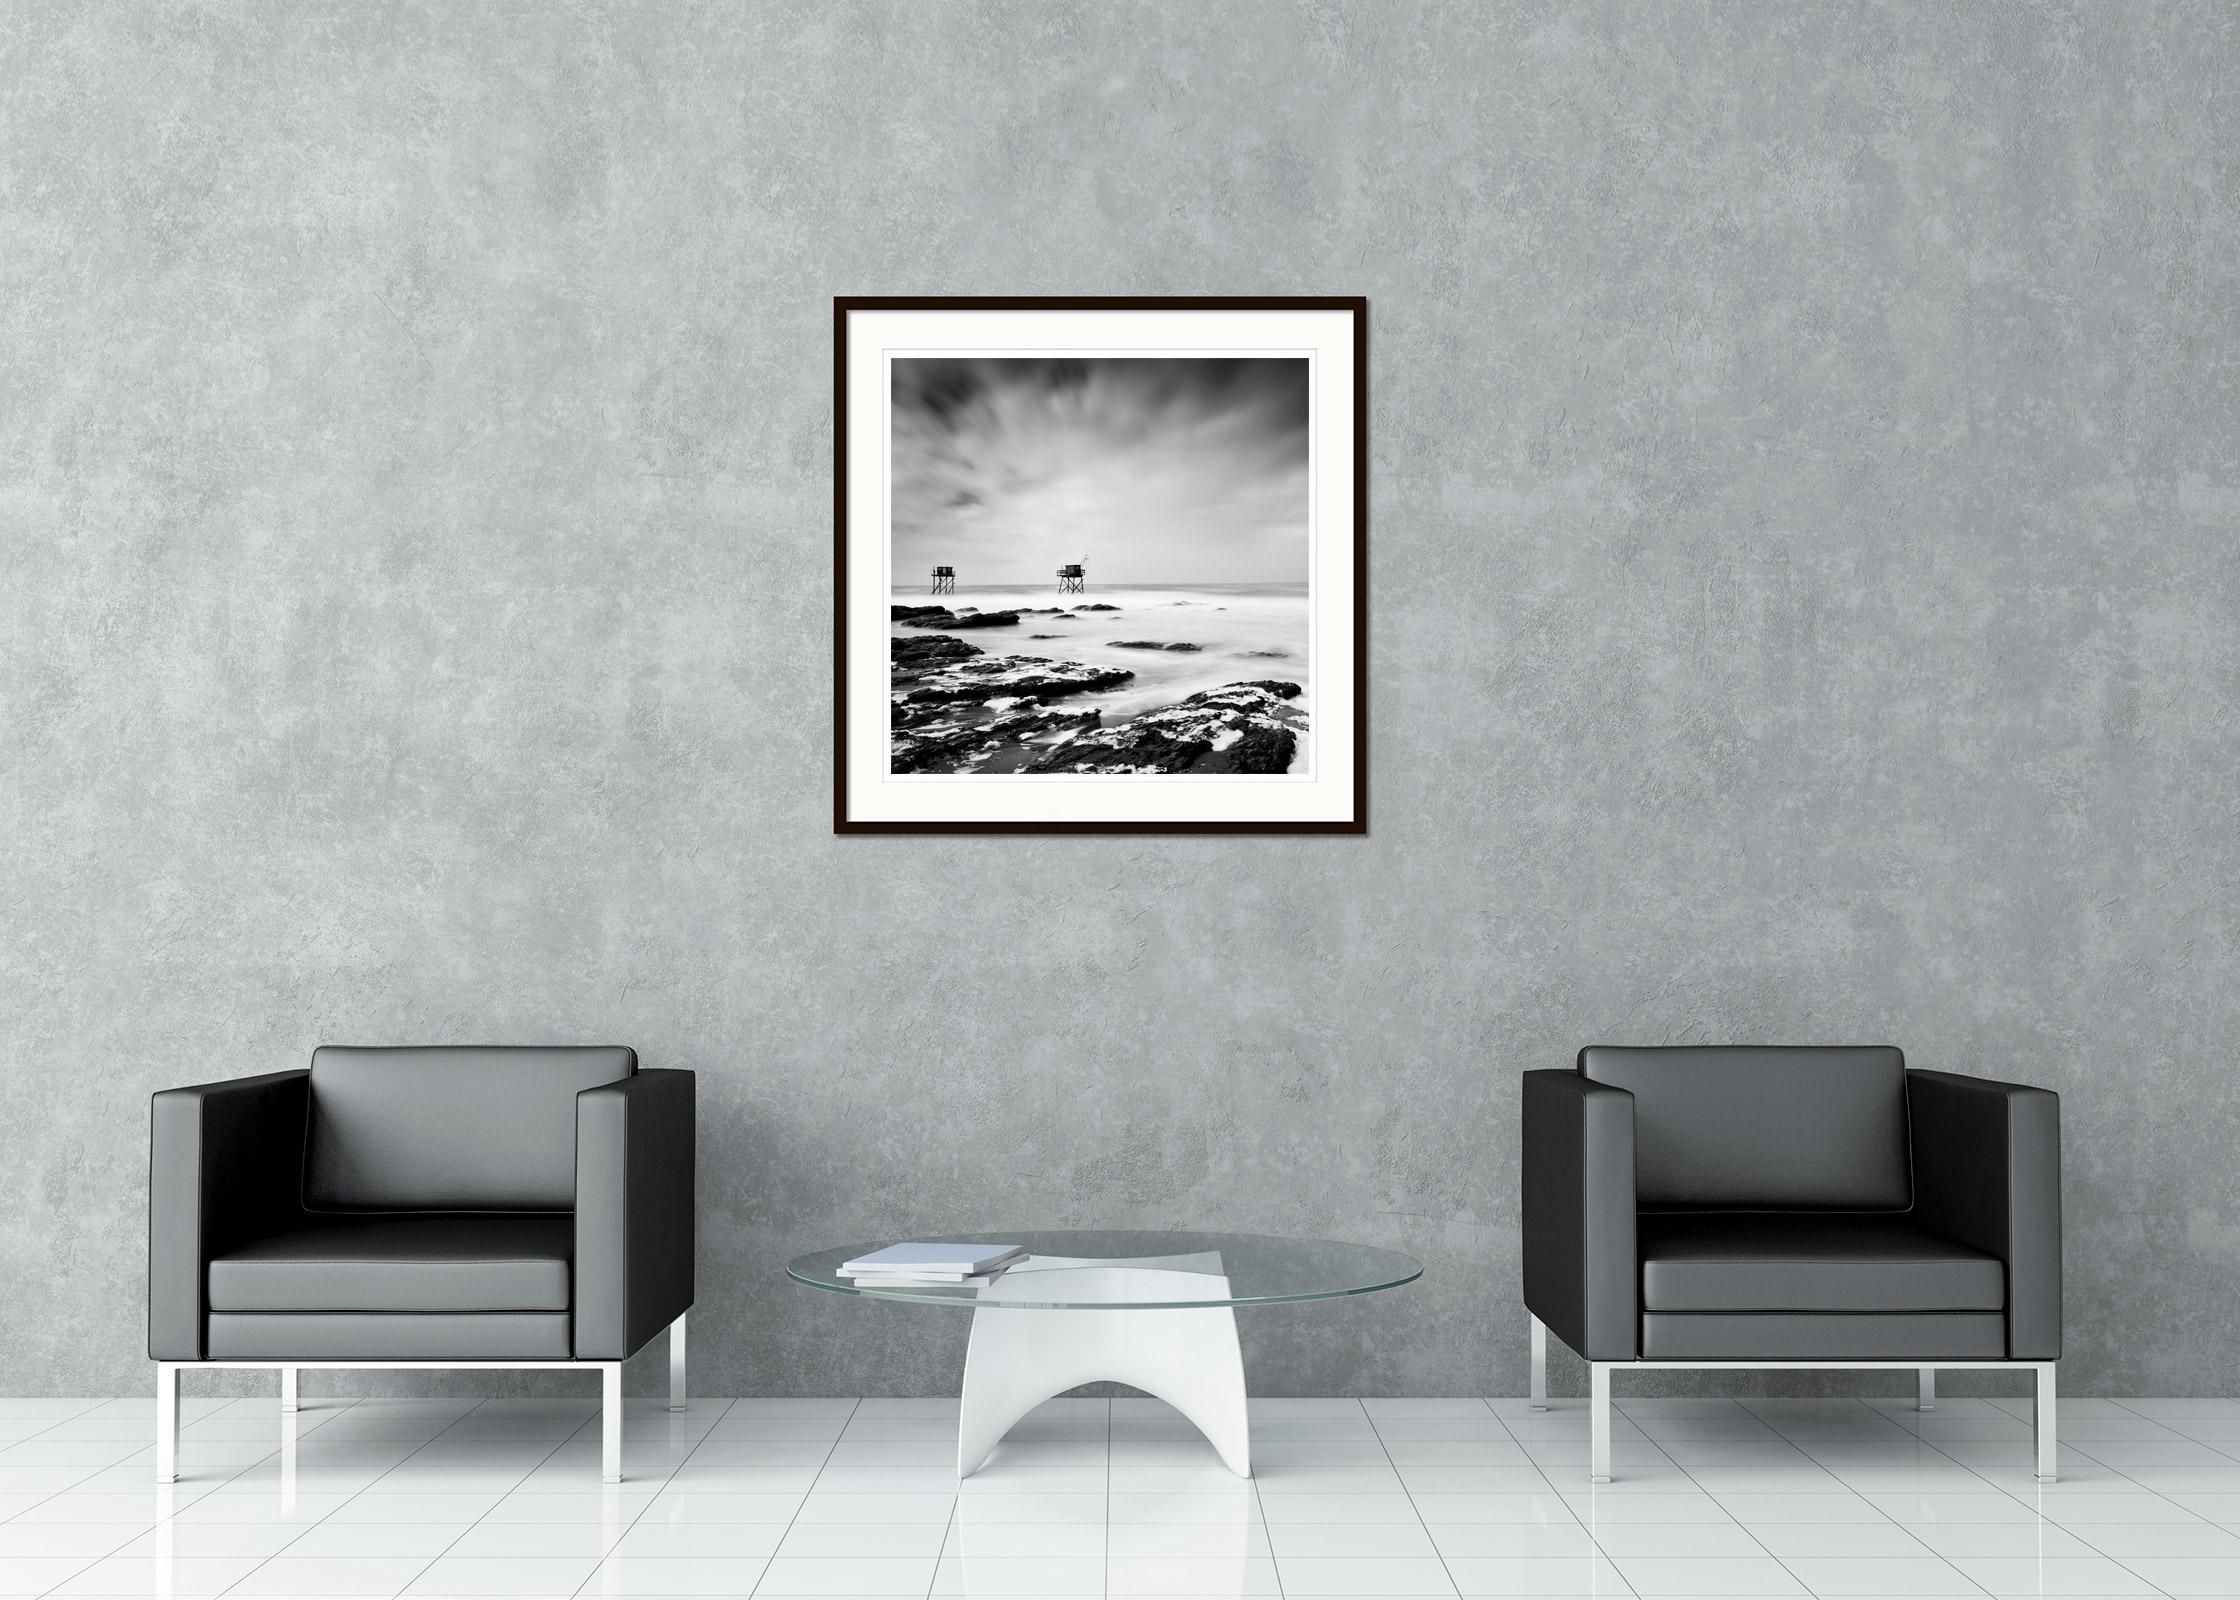 Black and white fine art long exposure waterscape - landscape photography print. Fishermen's huts on stilts in the wild surf of the French Atlantic coast. Archival pigment ink print, edition of 7. Signed, titled, dated and numbered by artist.